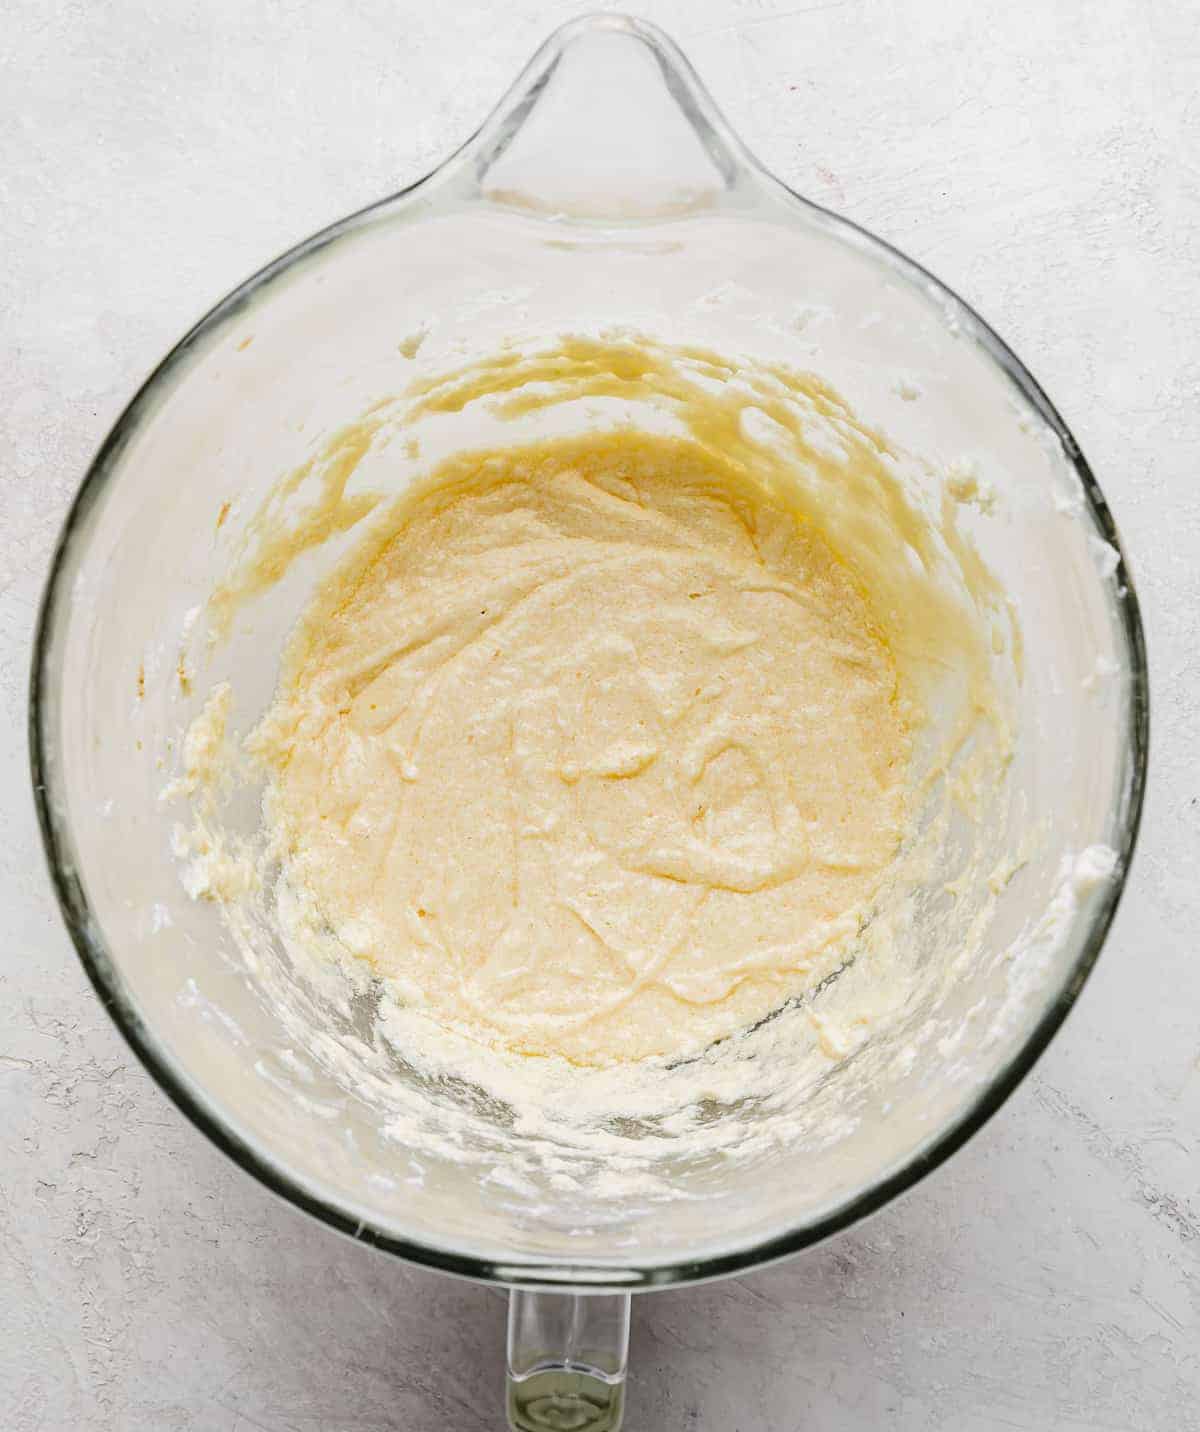 No Fail Sugar Cookies batter in a glass bowl on a gray background.